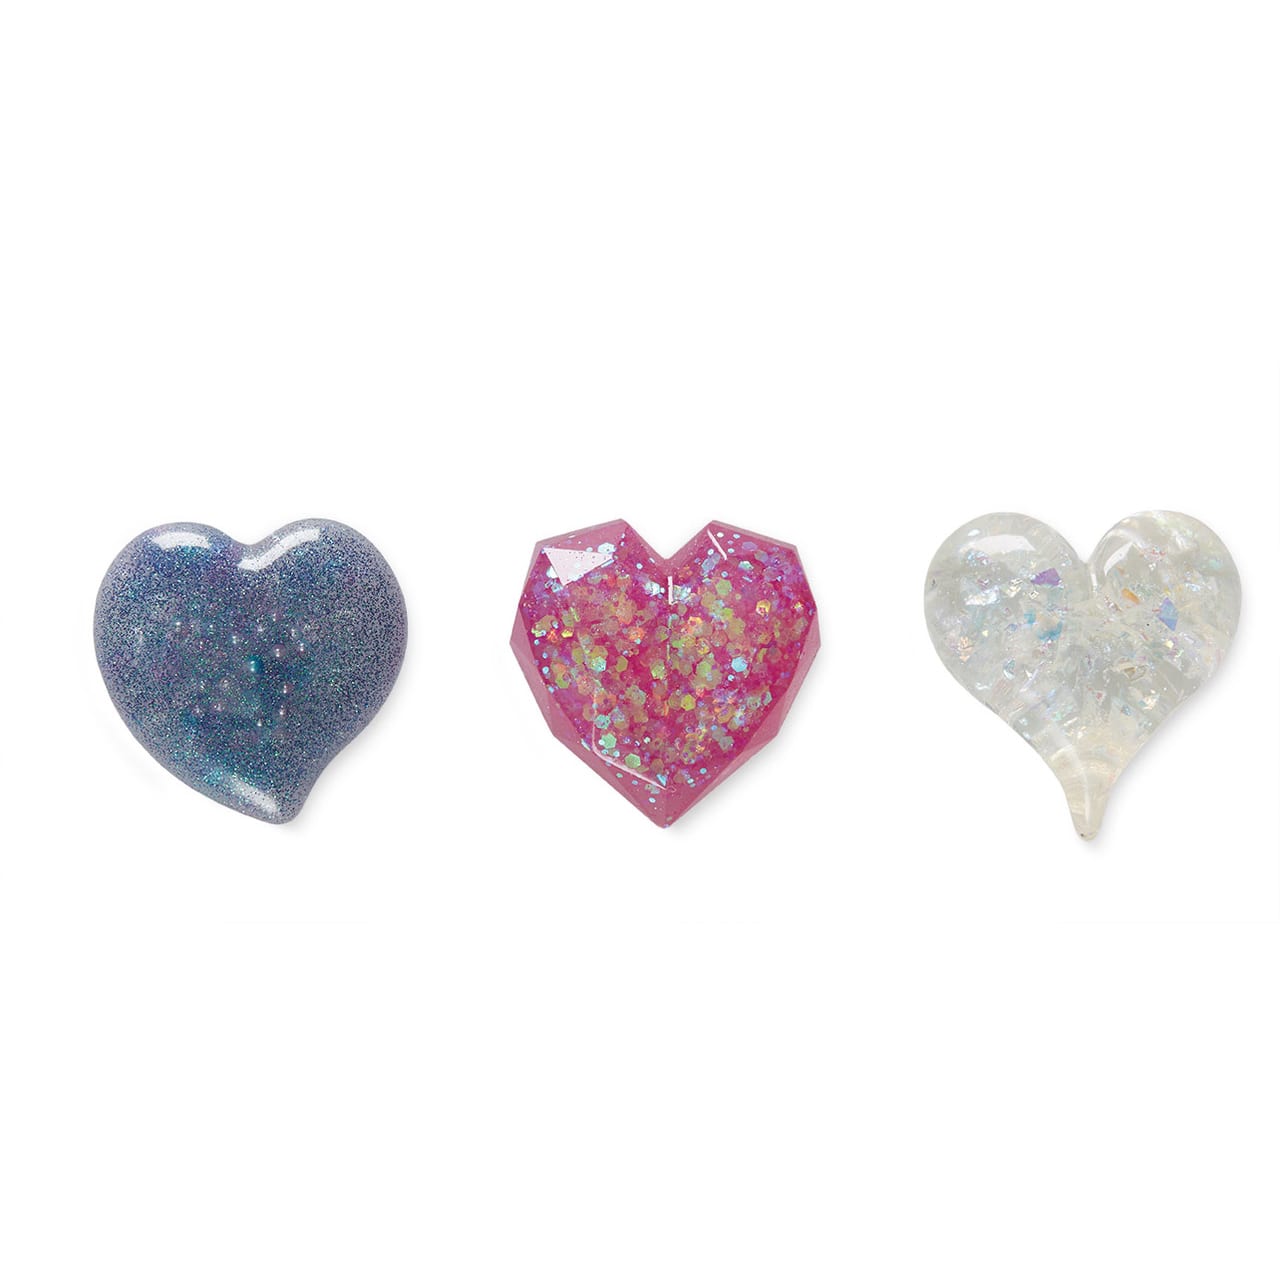 1.5 inch Heart Silicone Mold – The Crafts and Glitter Shop